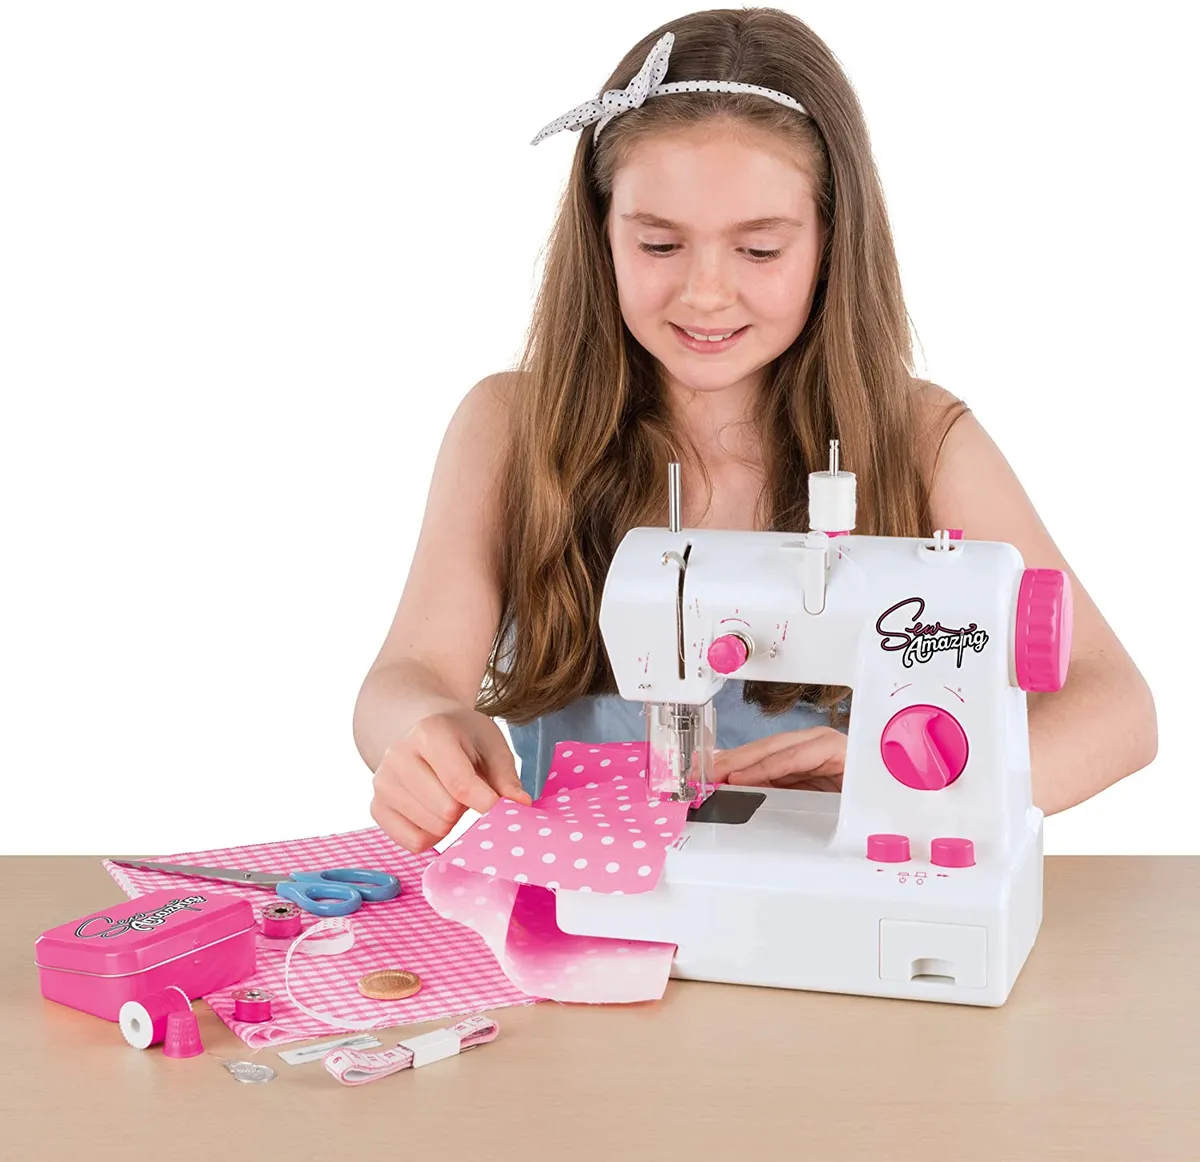 Best Sewing Machines for Kids, Teens, and Beginners of All Ages